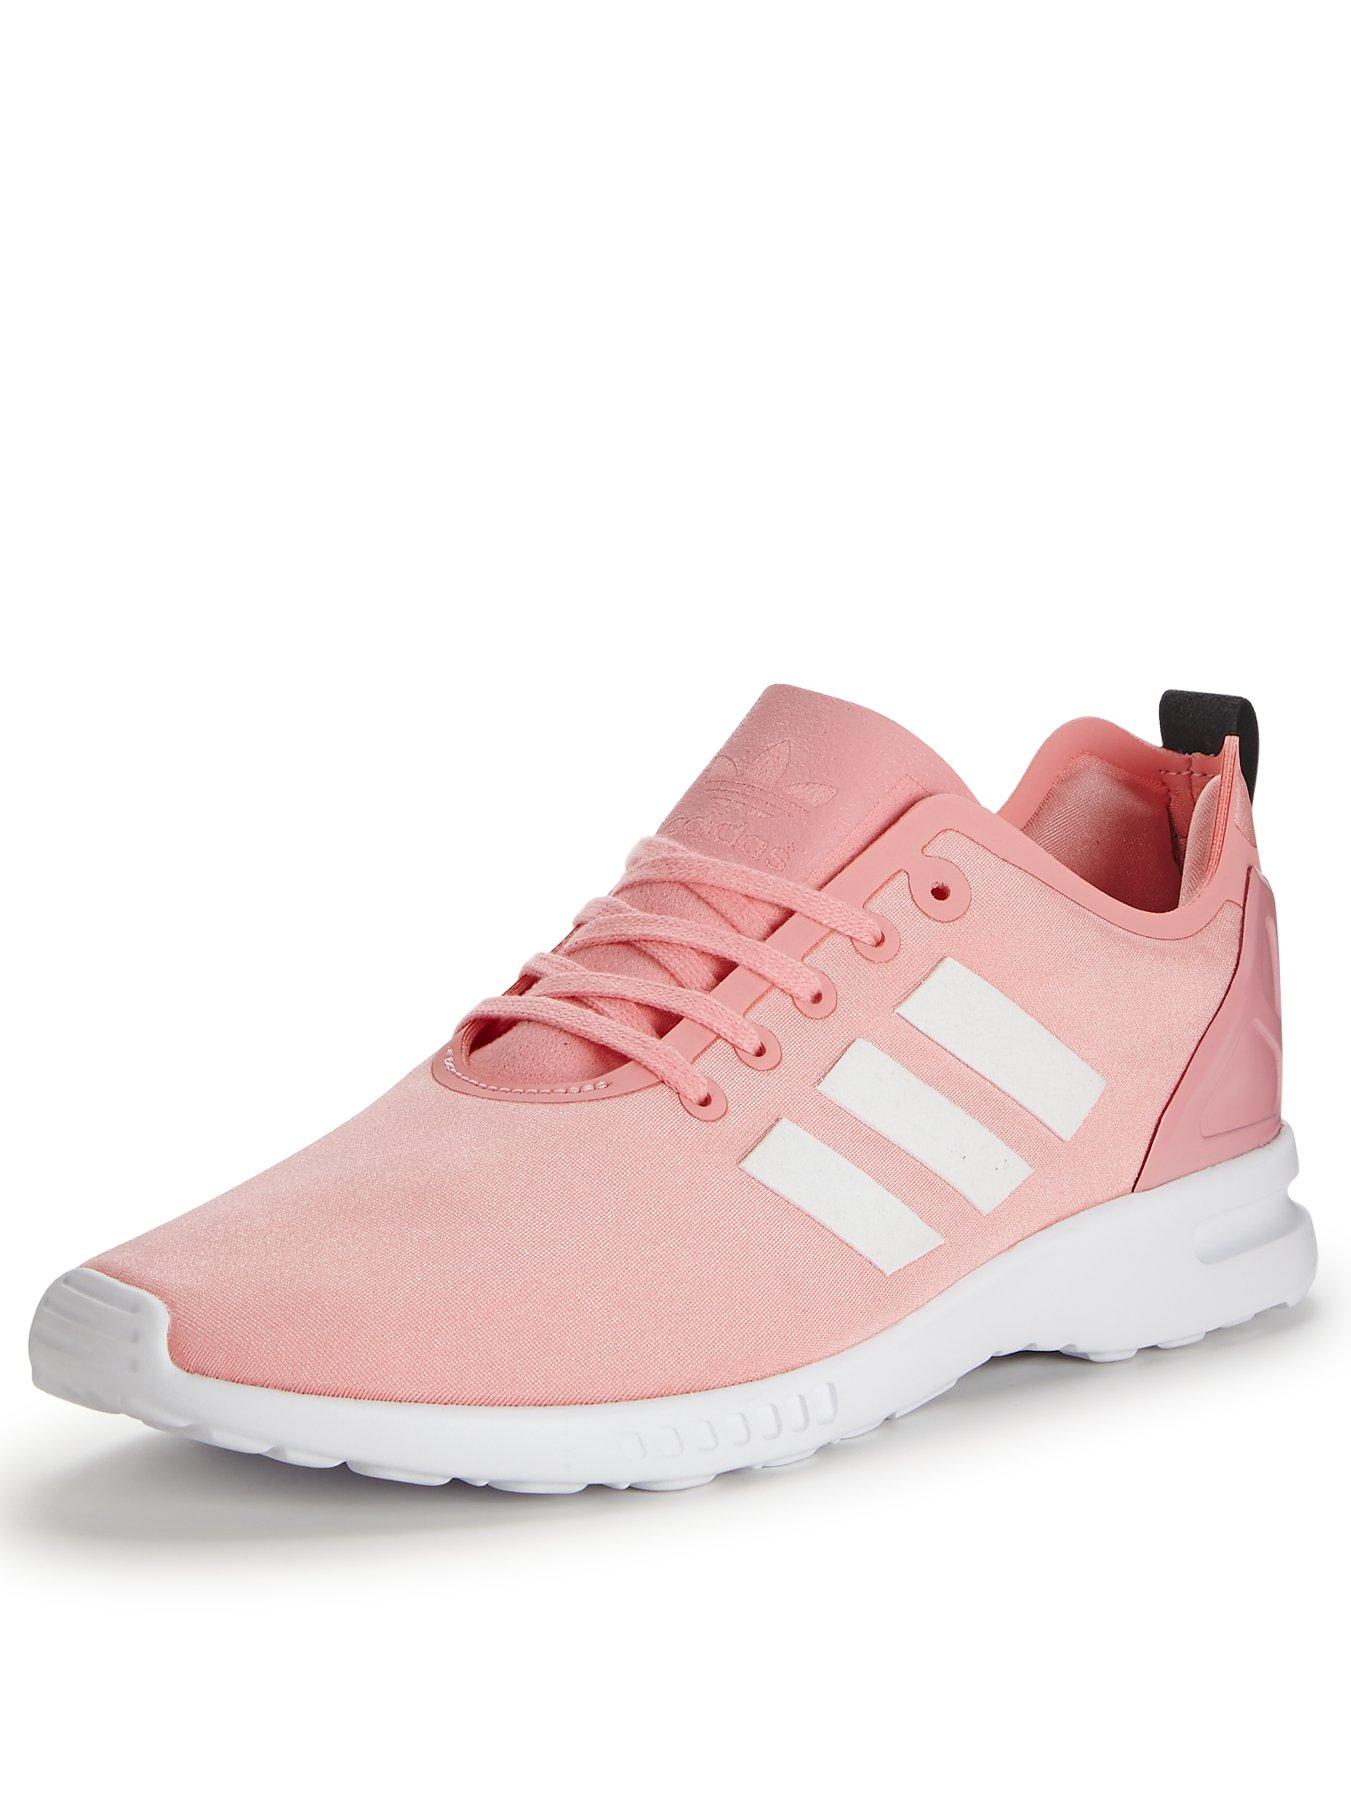 adidas baby pink trainers